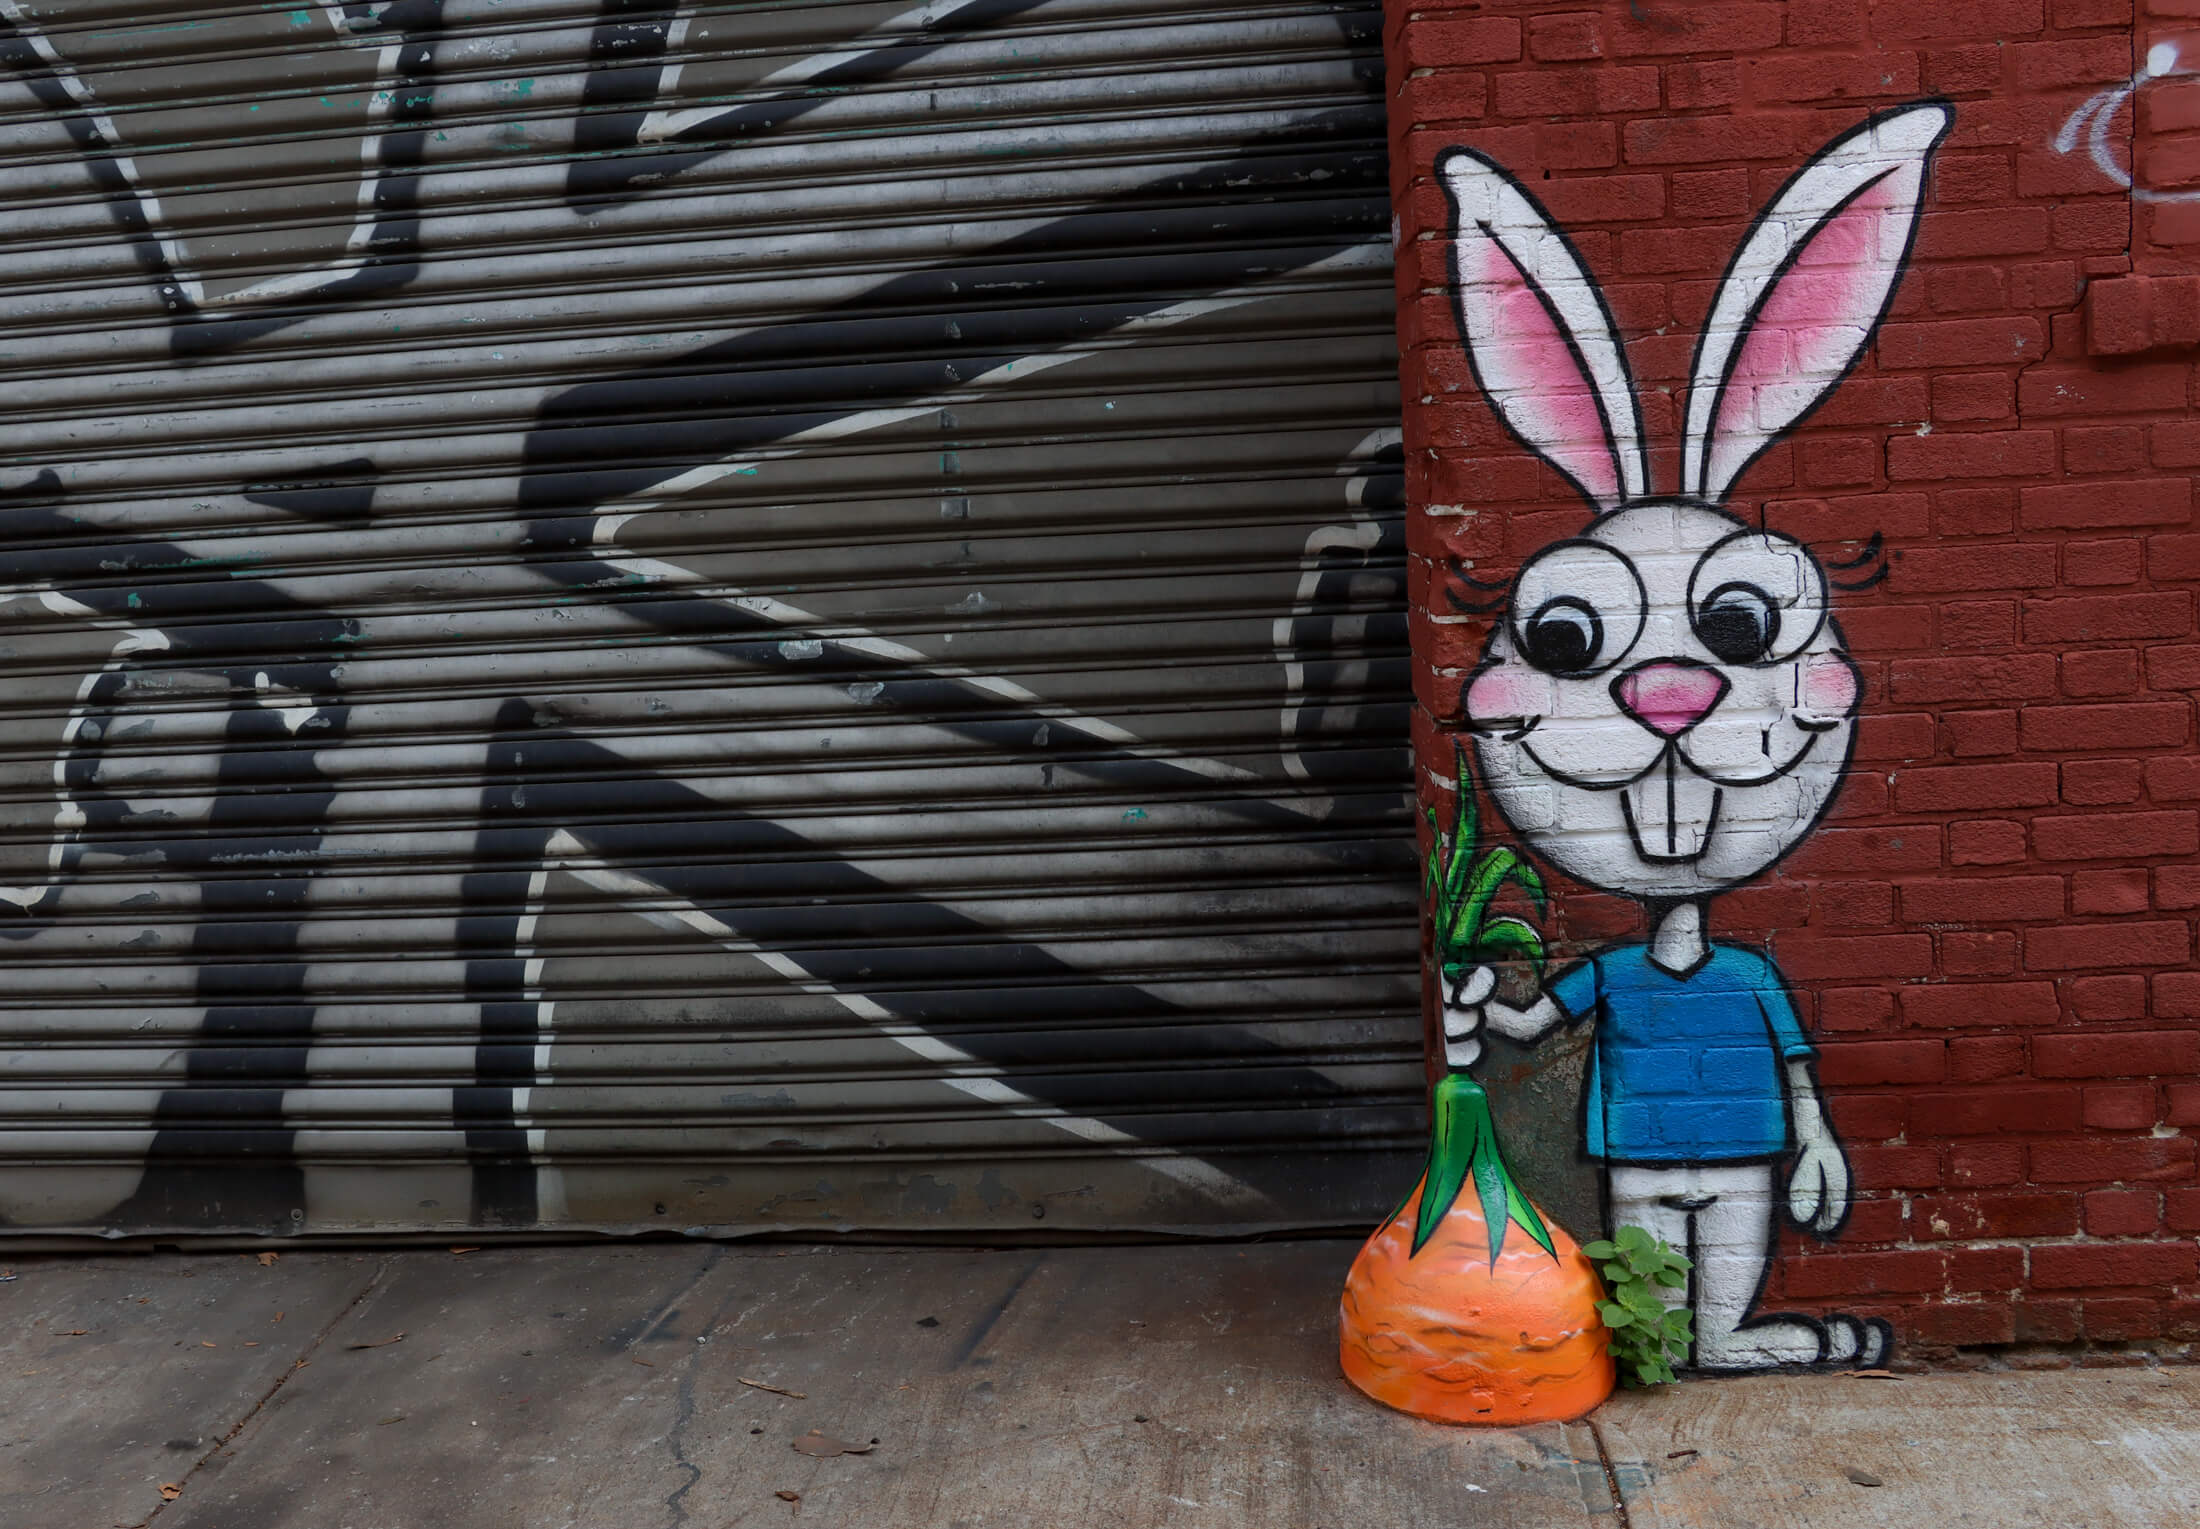 brooklyn news - photo of the daya rabbit holding a carrot painted on a brick building in williamsburg